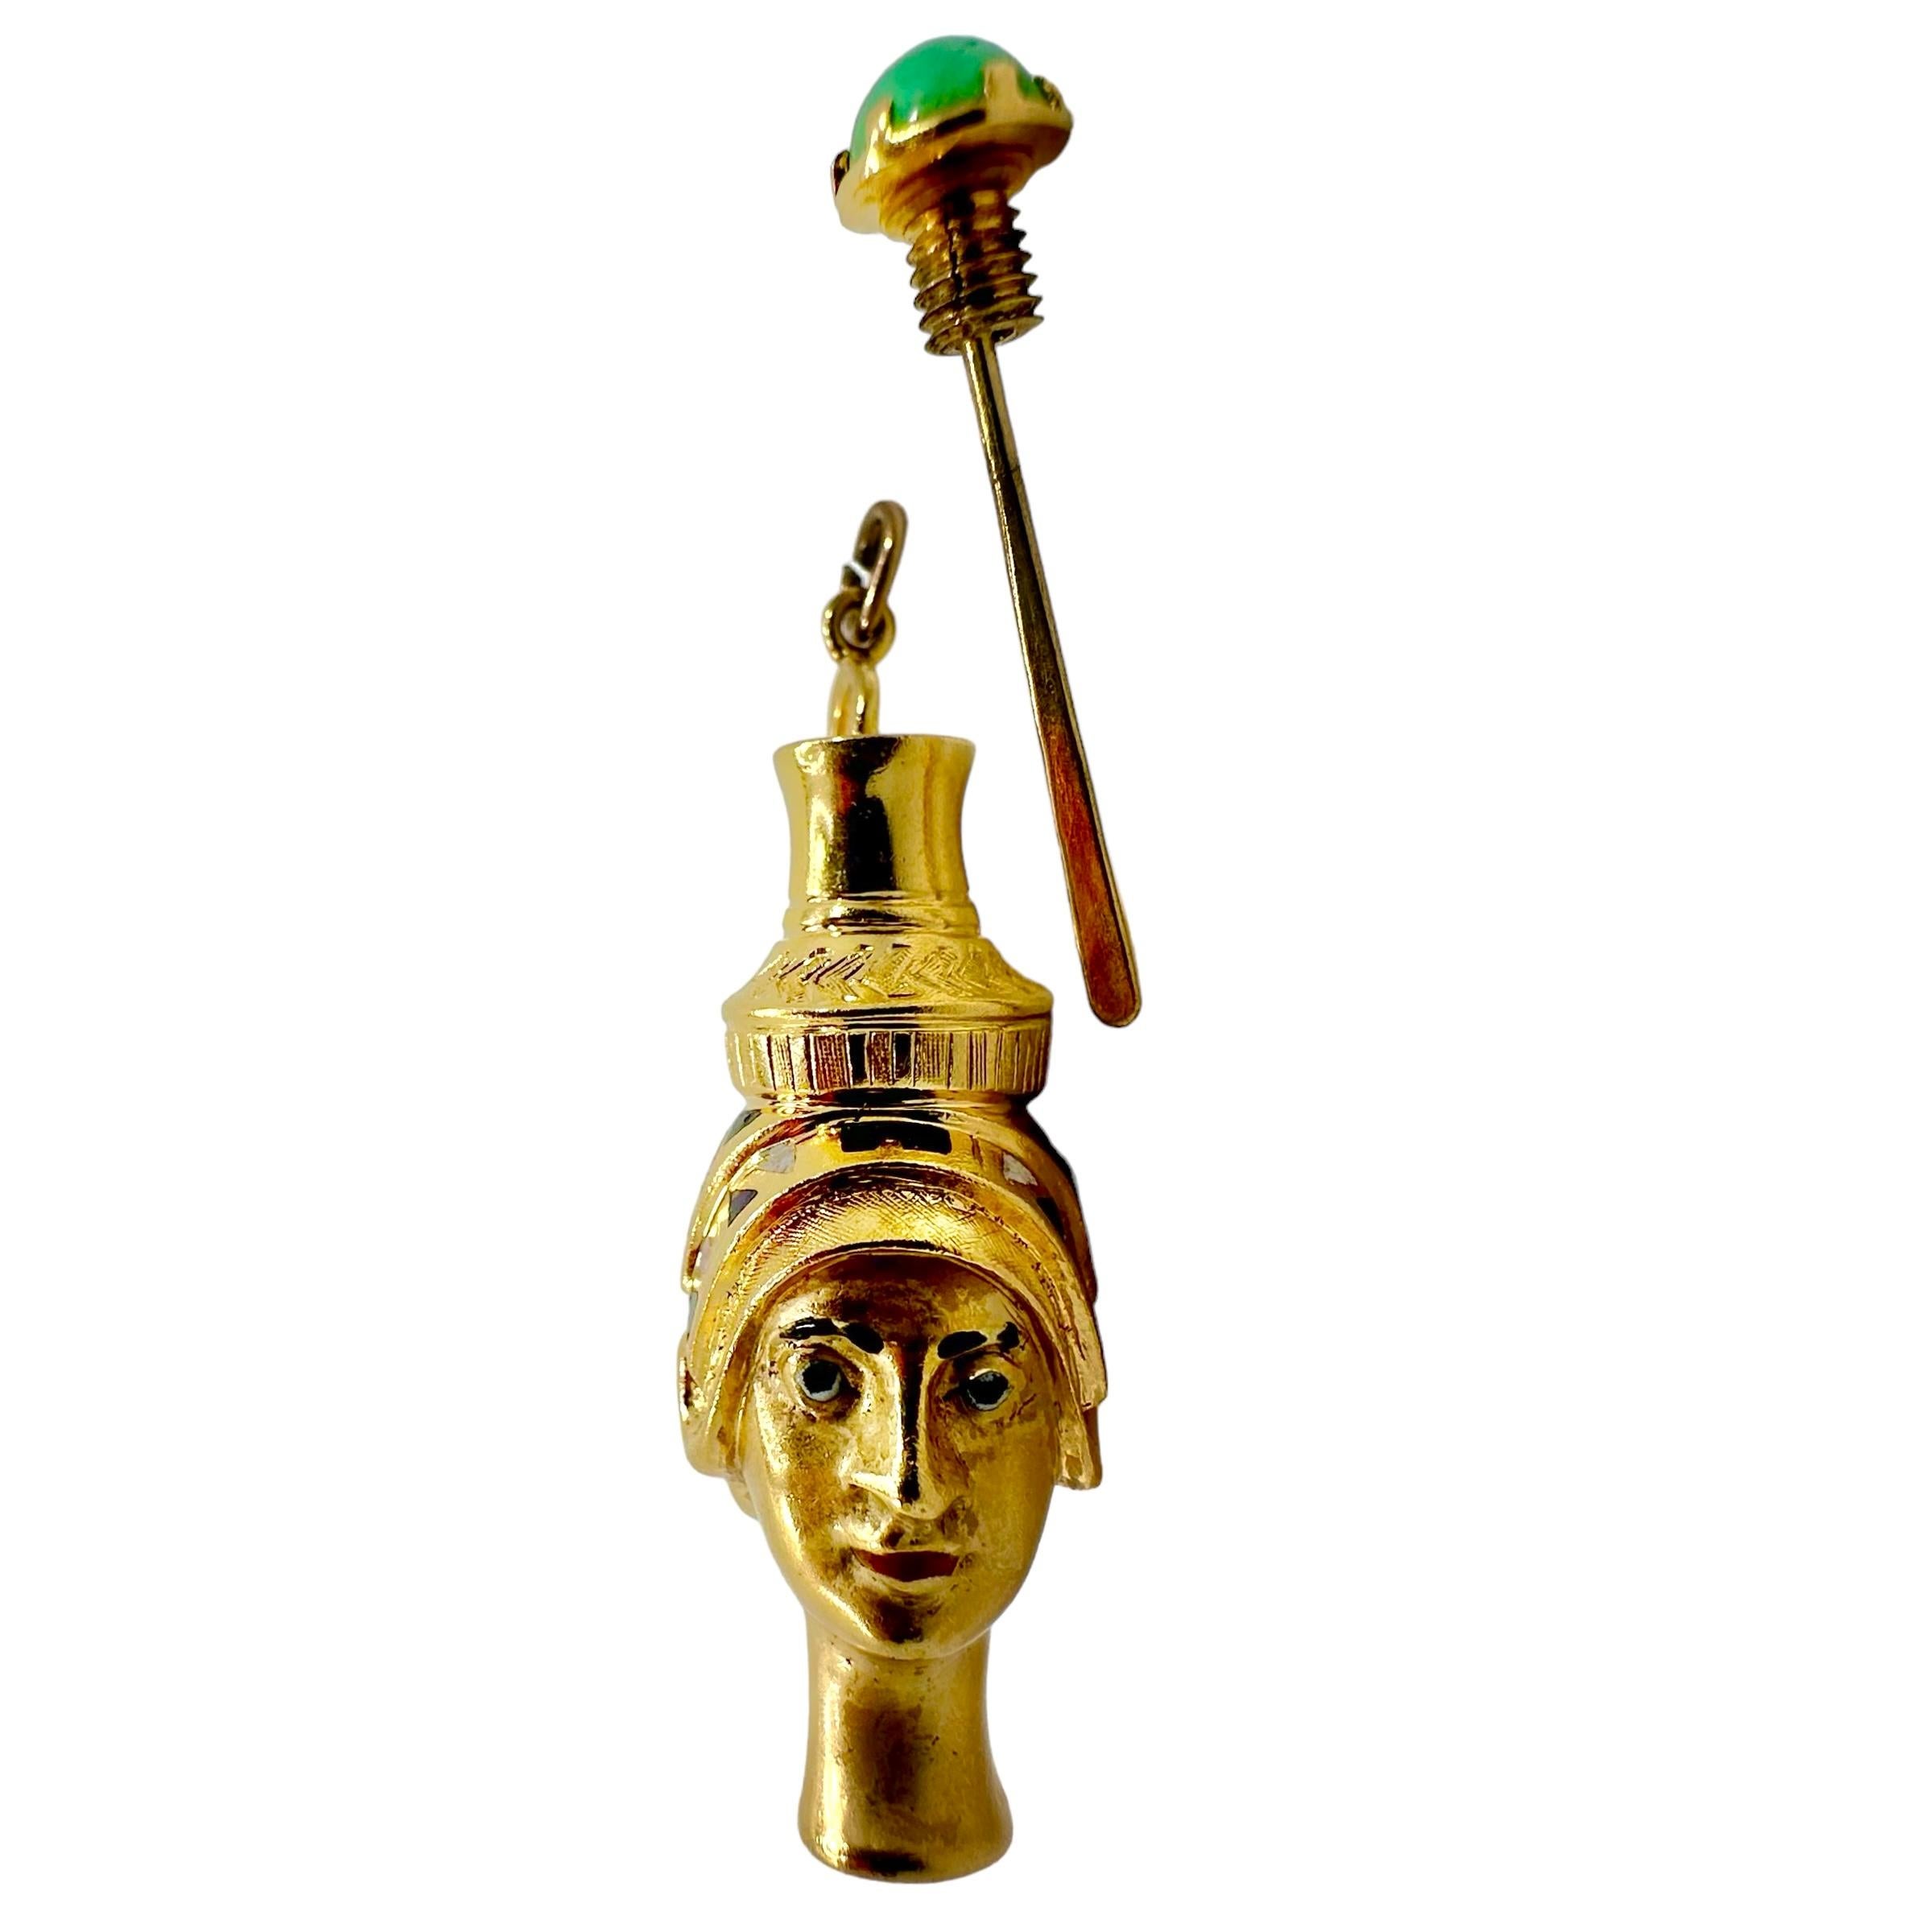 Positively Unique Vintage Gold Italian Vintage Egyptian Themed Perfume Amulet For Sale 2